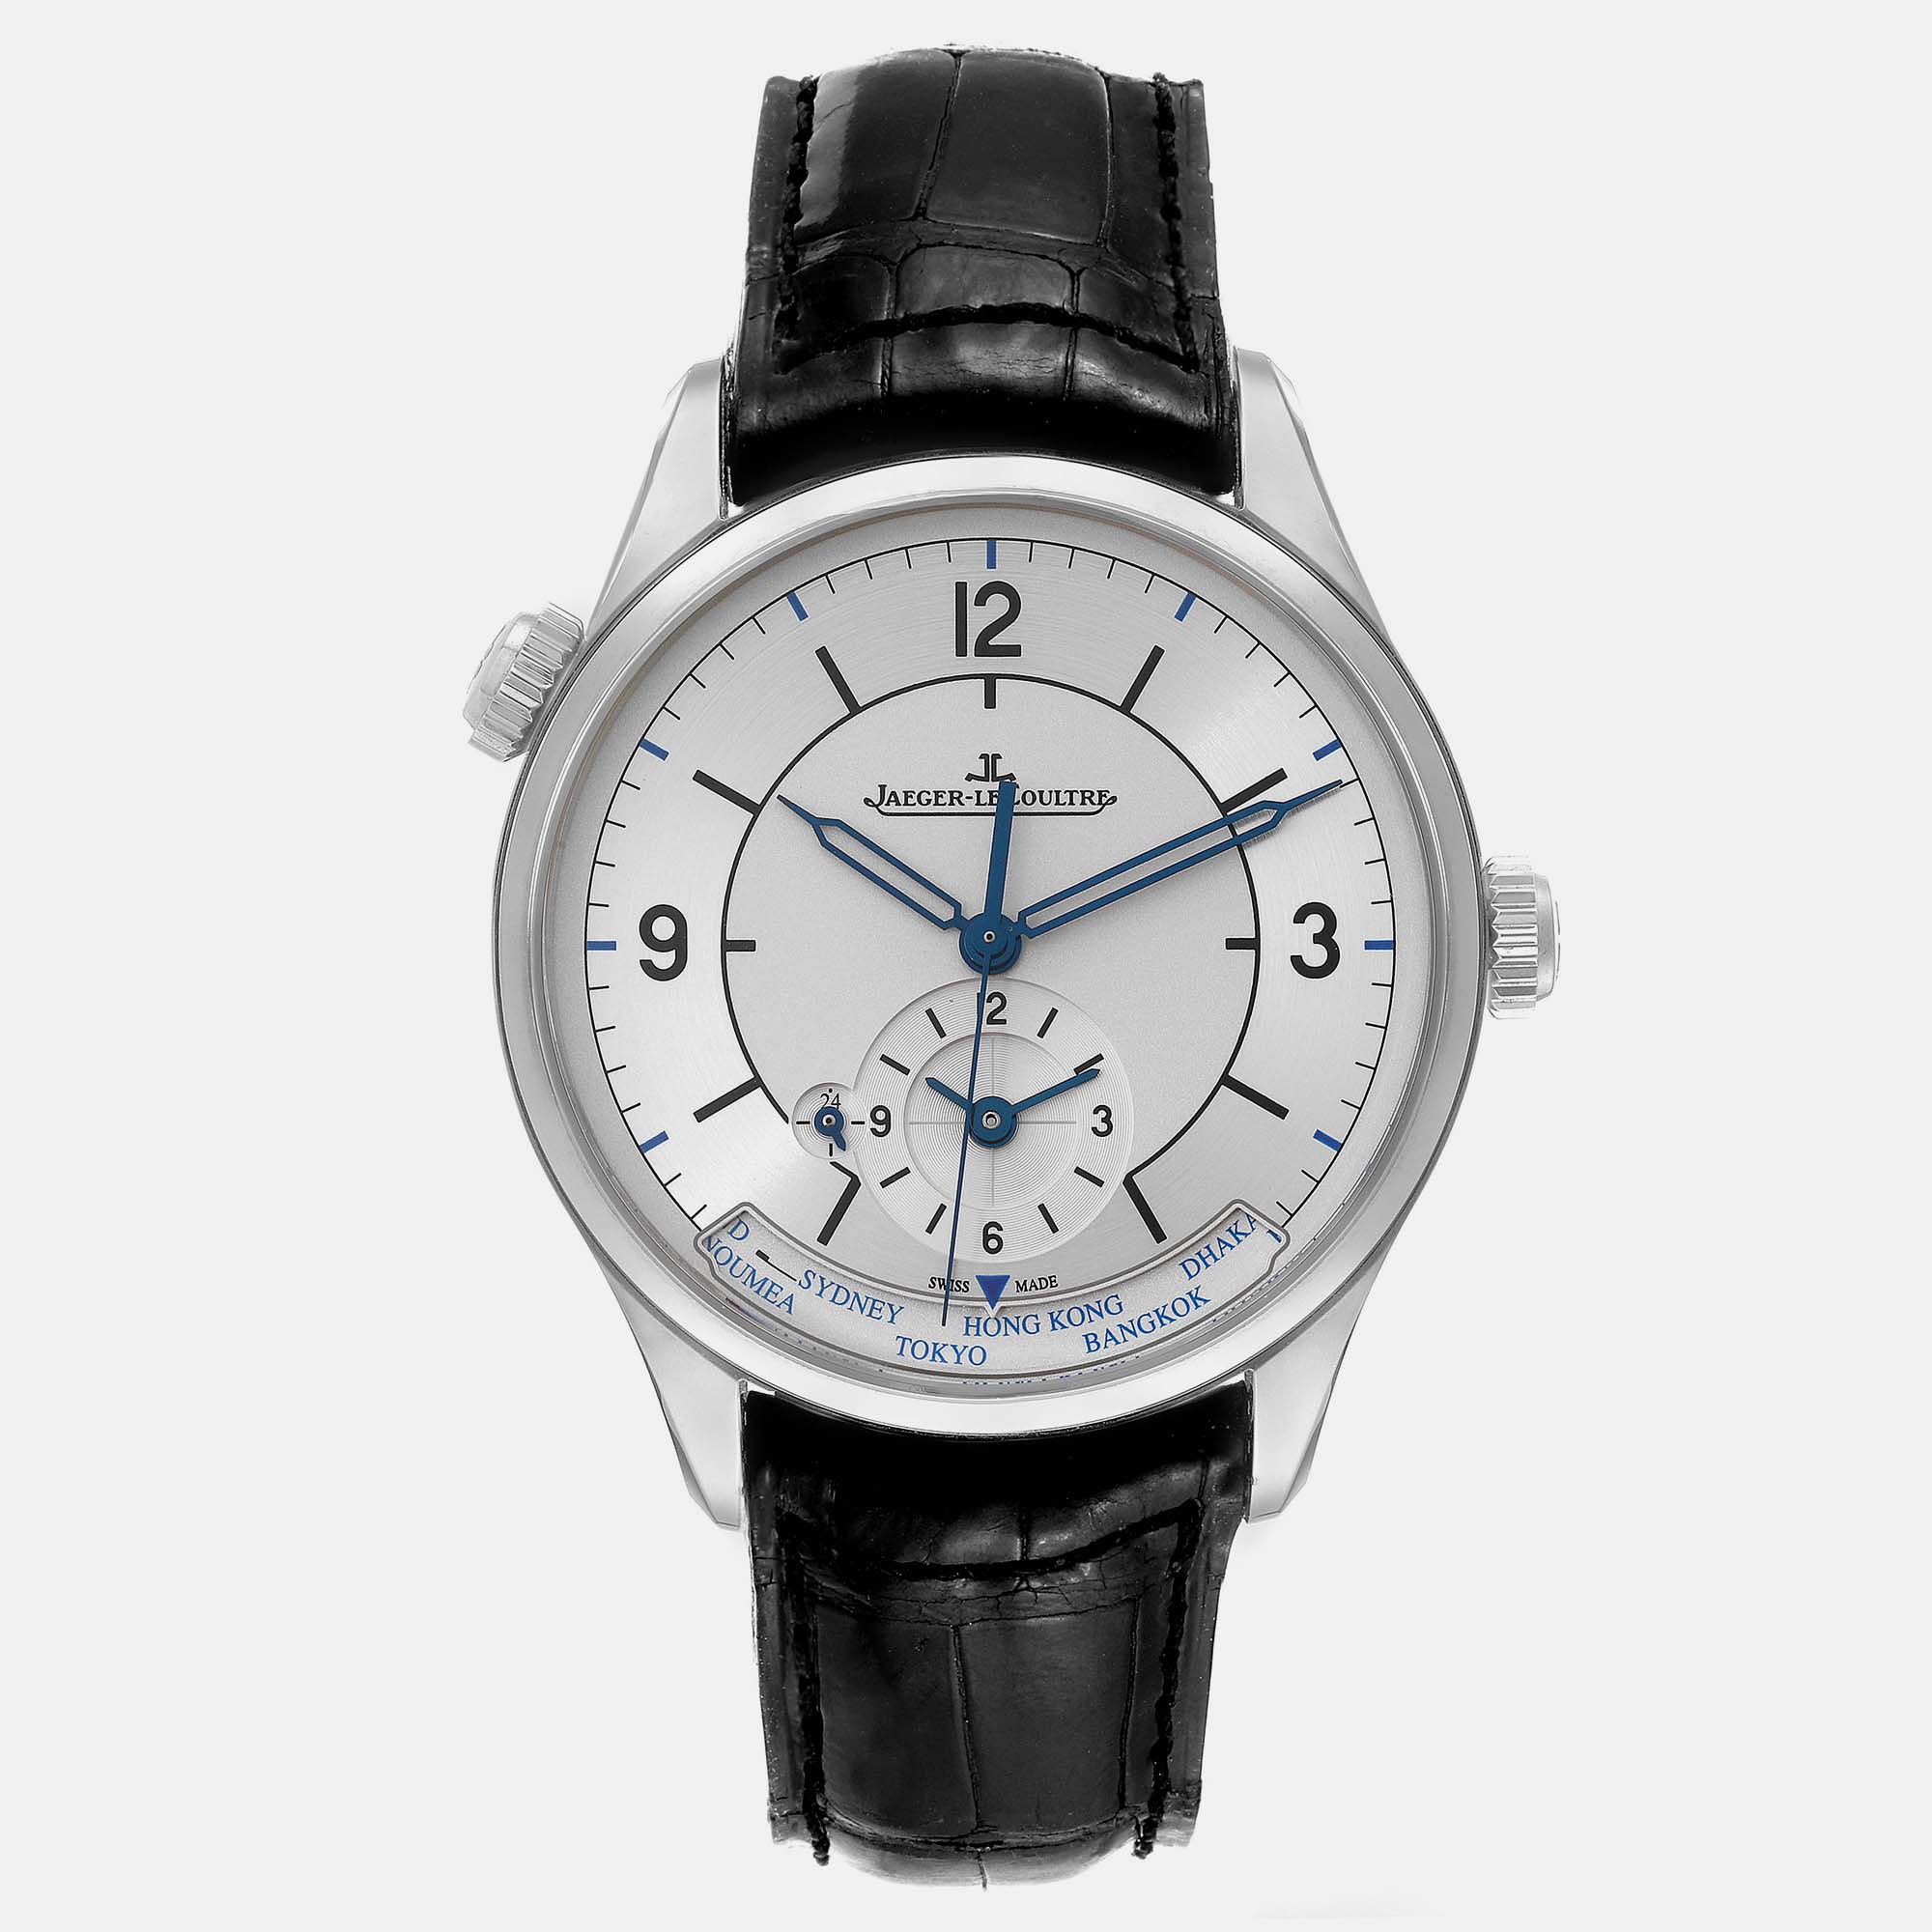 Jaeger LeCoultre Silver Stainless Steel Master Geographique Q1428530 Automatic Men's Wristwatch 39 Mm